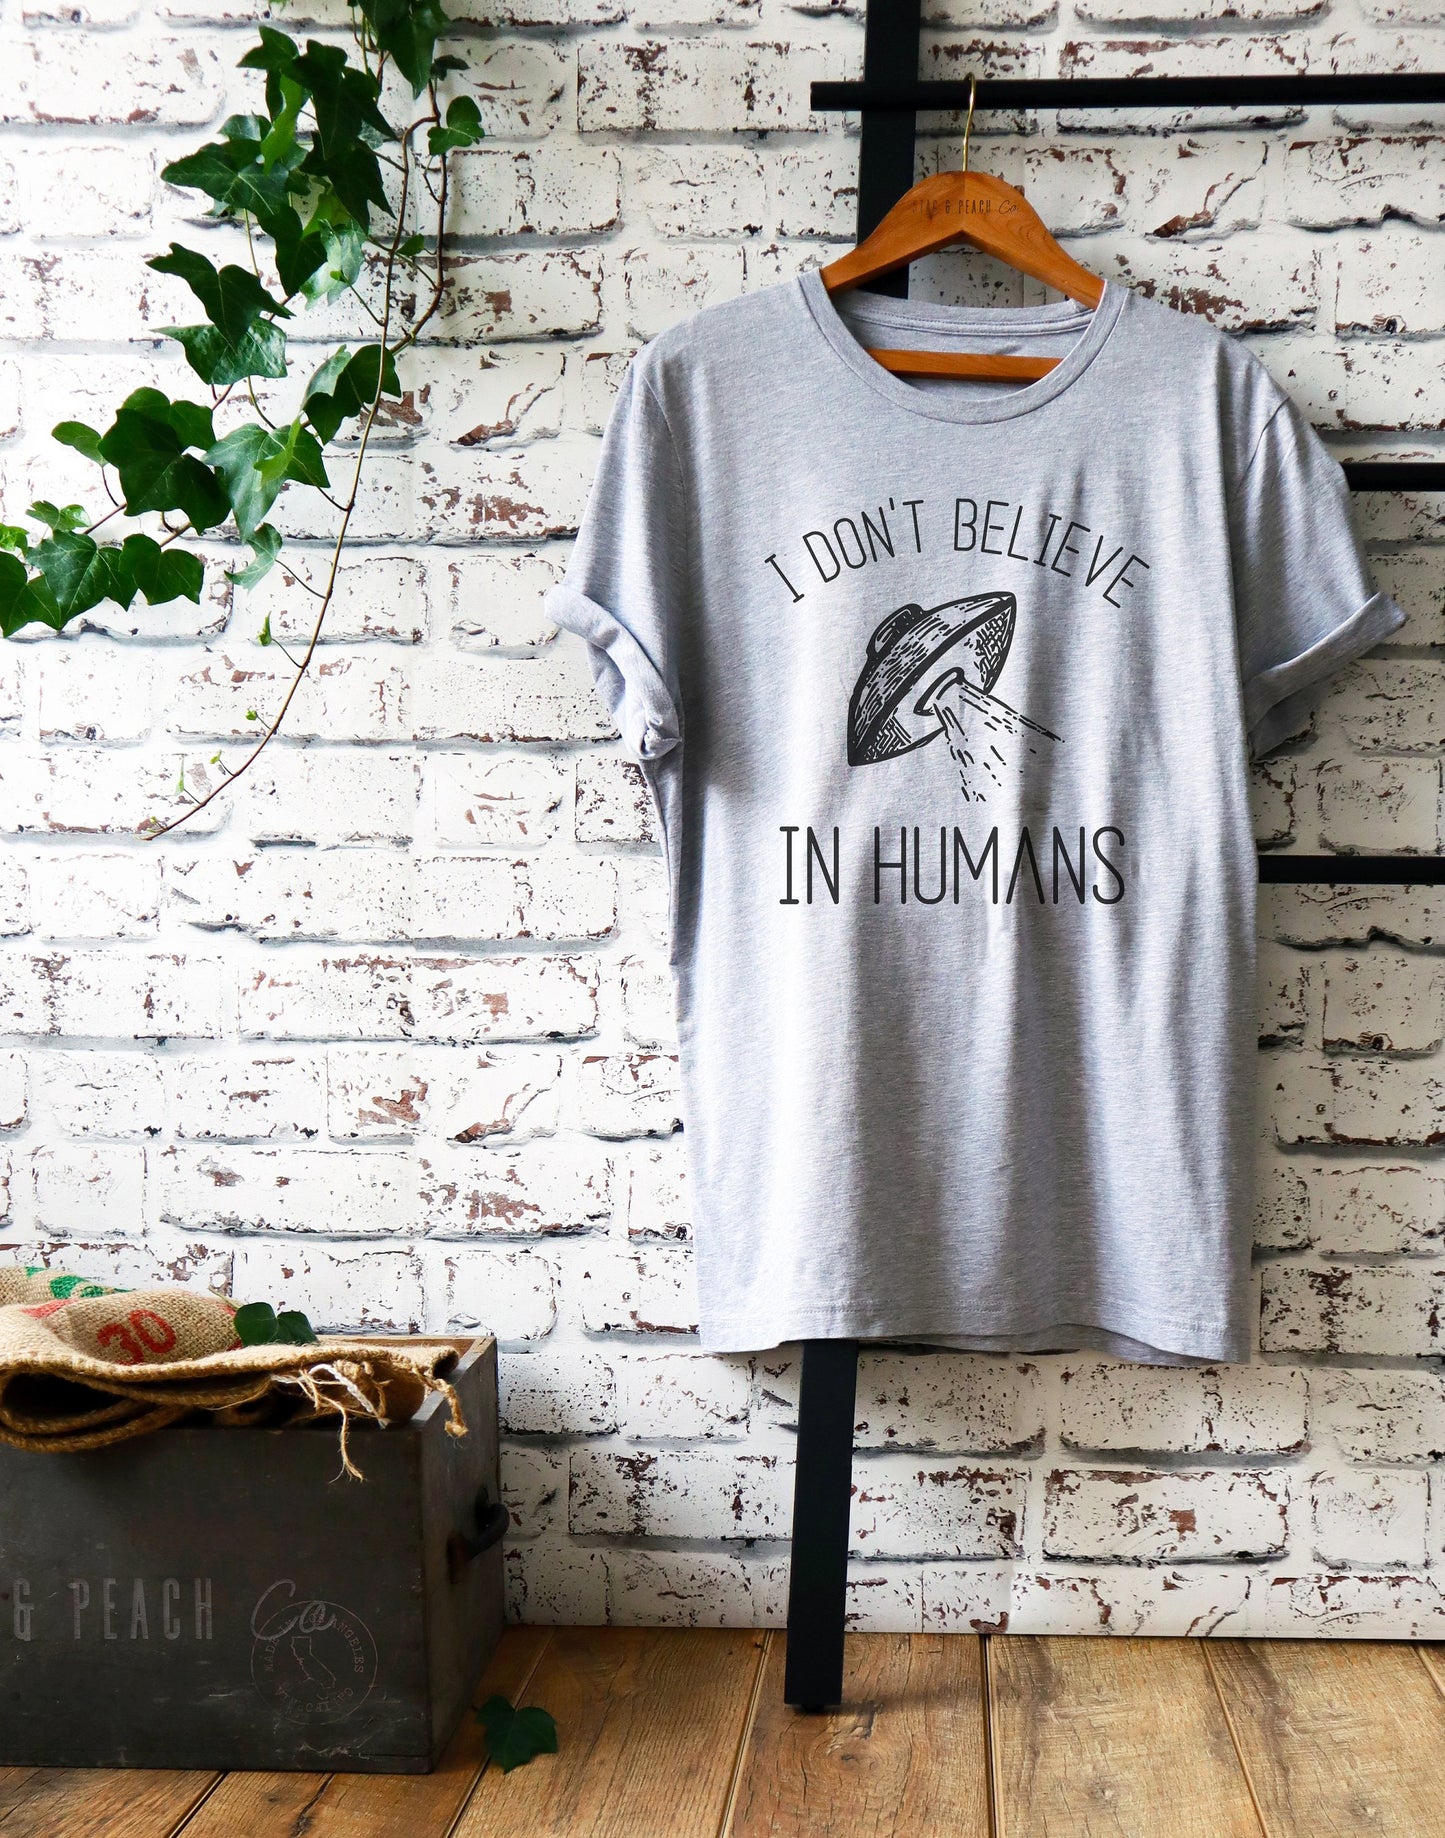 I Don't Believe In Humans Unisex Shirt - Alien Shirt, Alien Gift, Space Shirt, Space Gift, UFO Shirt, Alien T Shirt, Outer Space, UFO Gift